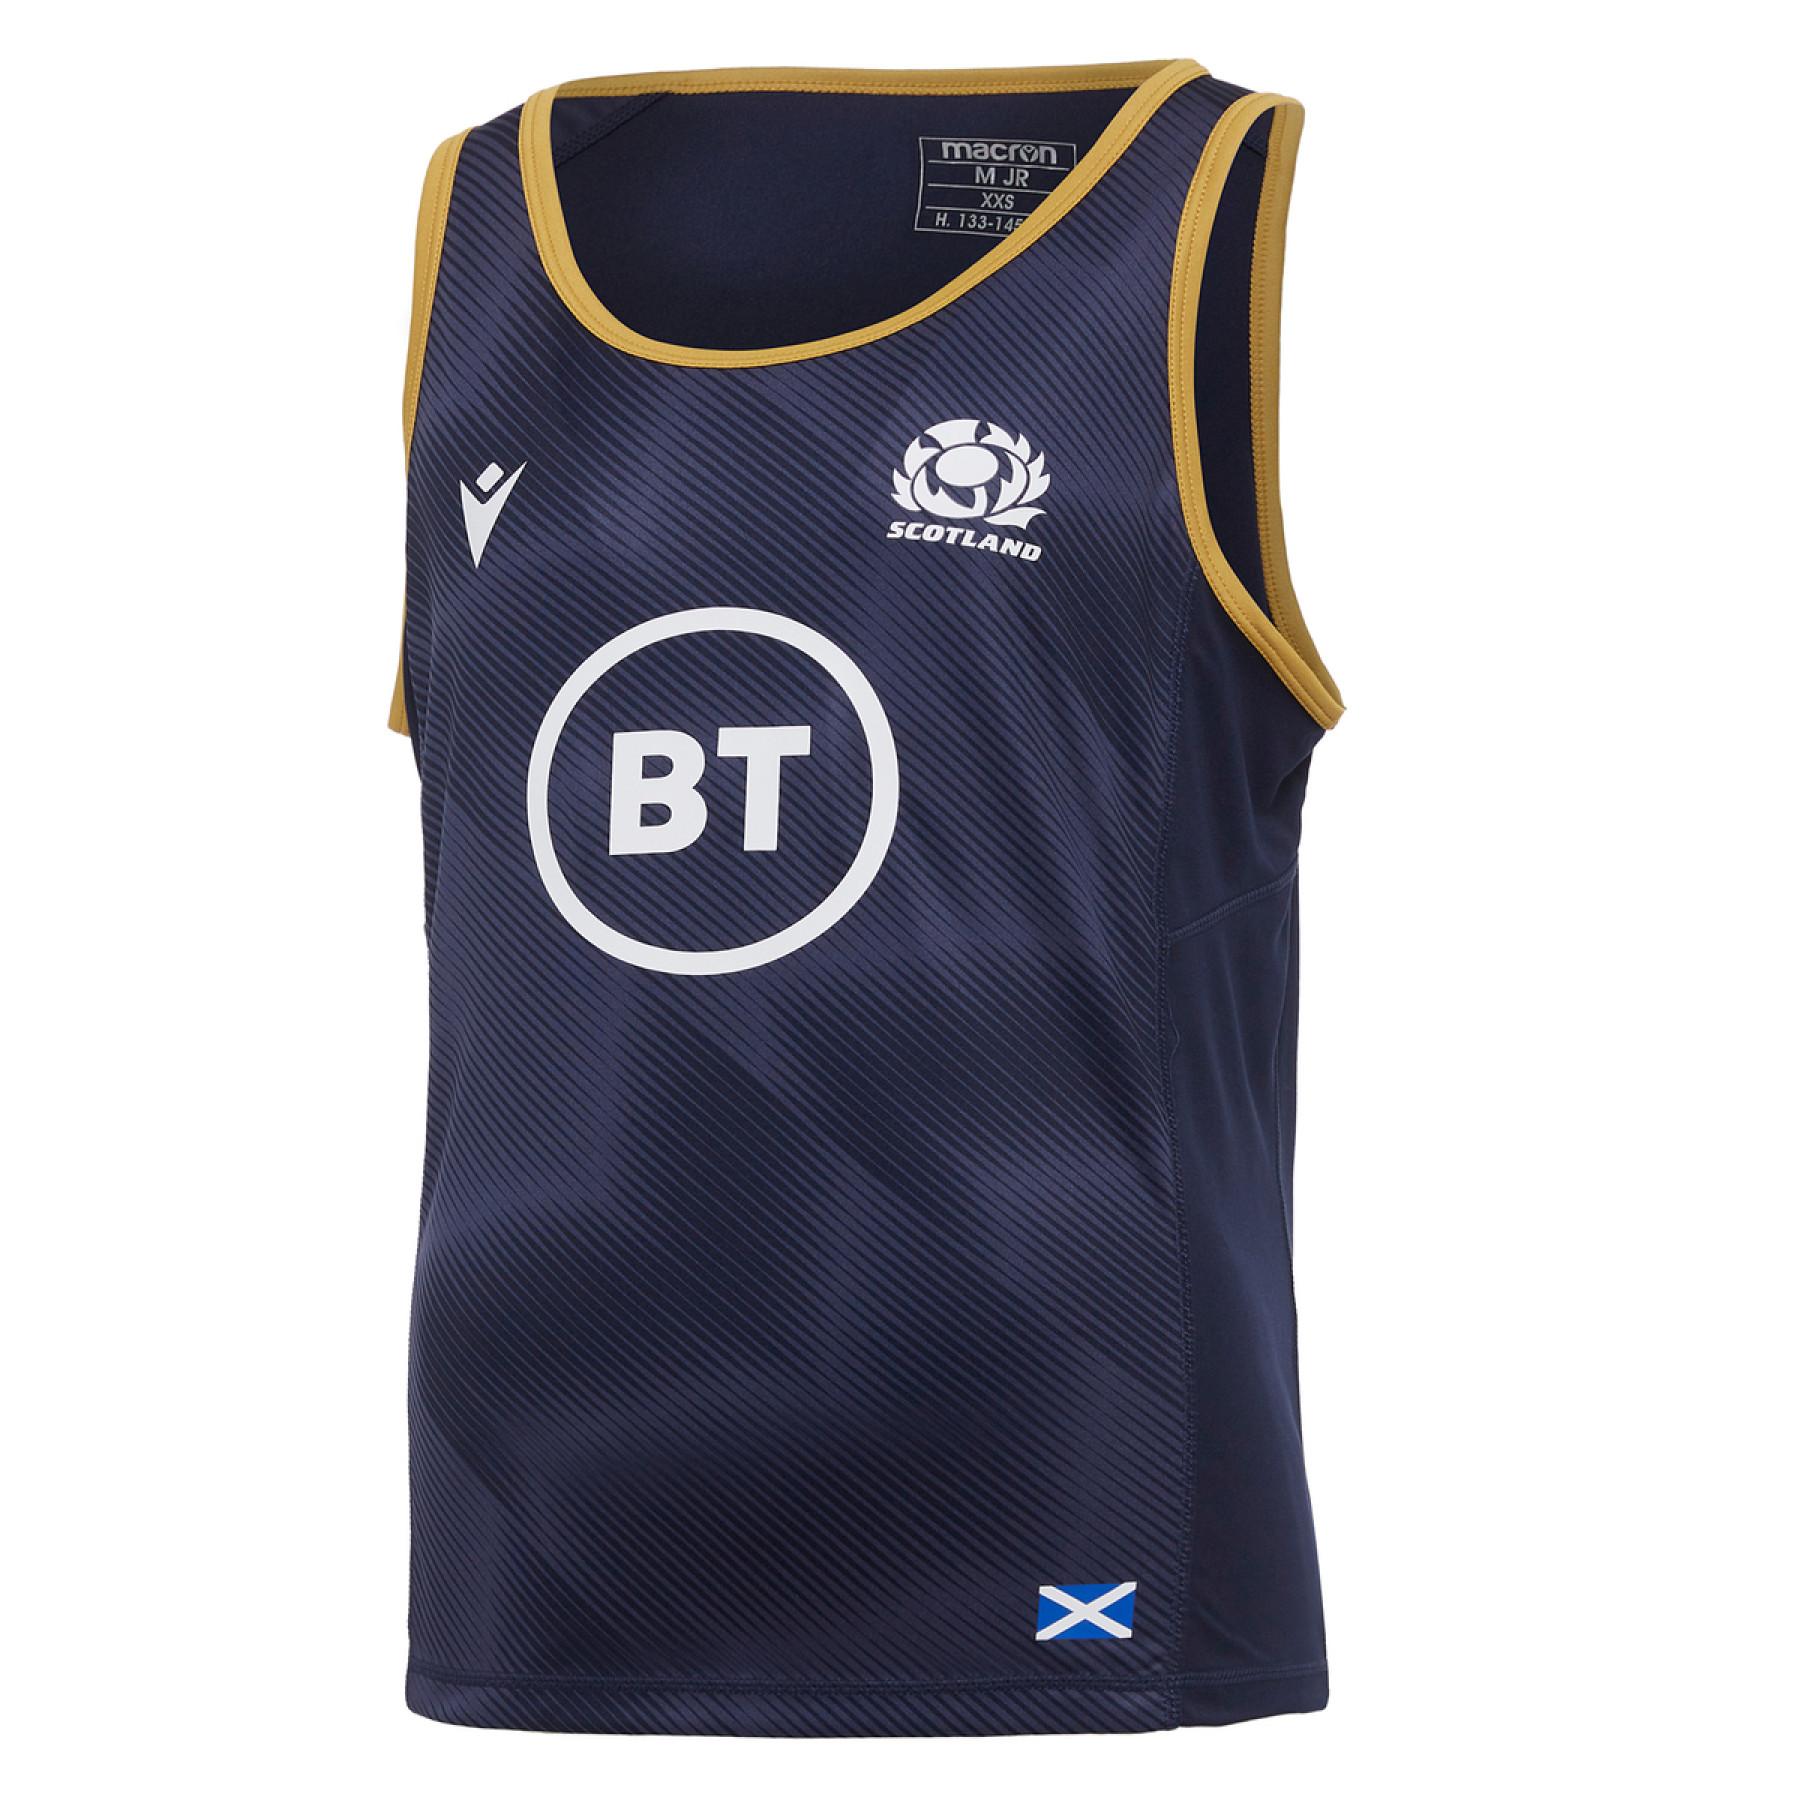 Schotland rugby tank top 2020/21